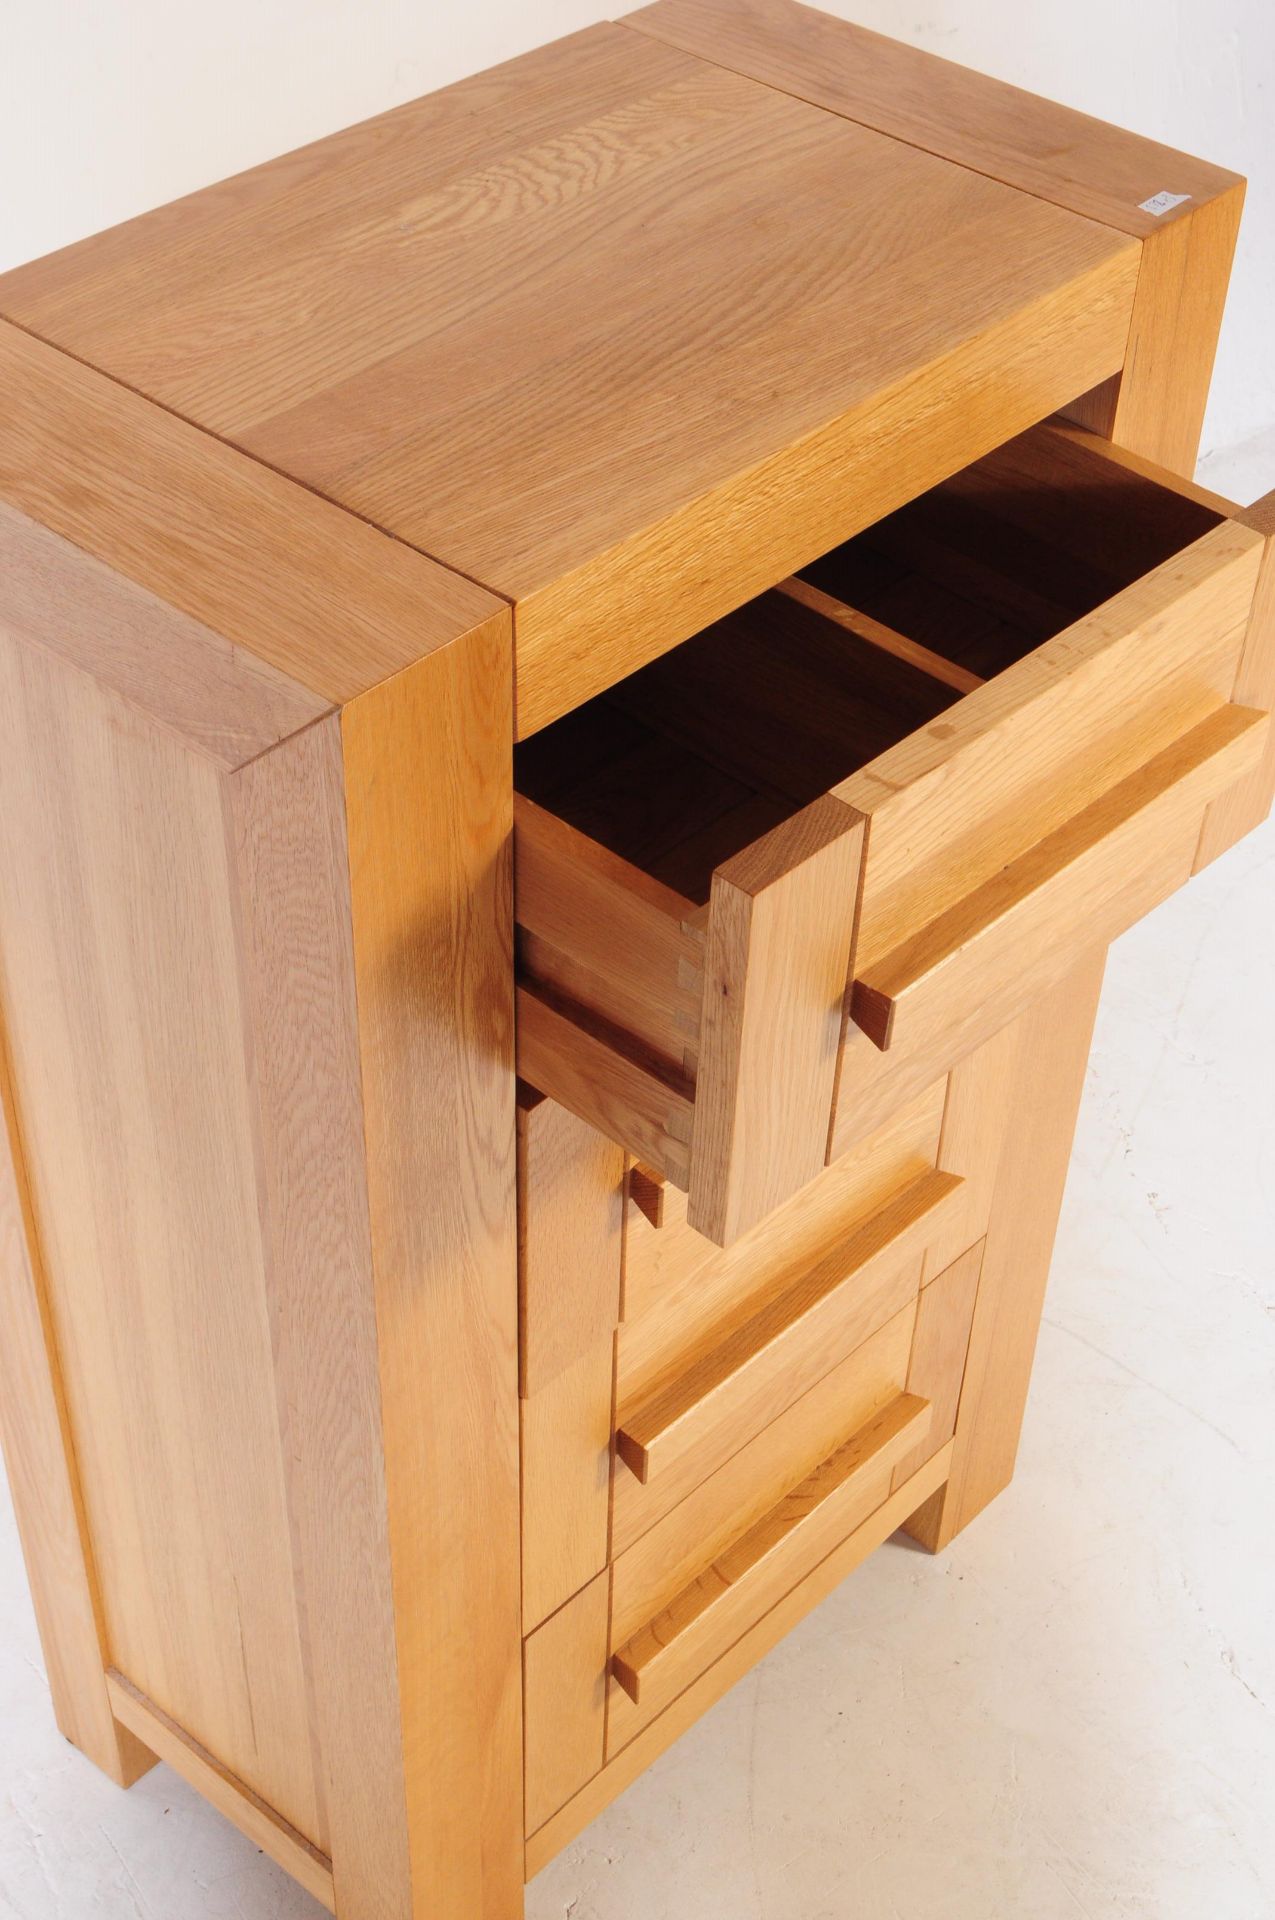 M&S SONOMA - PAIR OF OAK BEDSIDE TABLES - Image 4 of 11